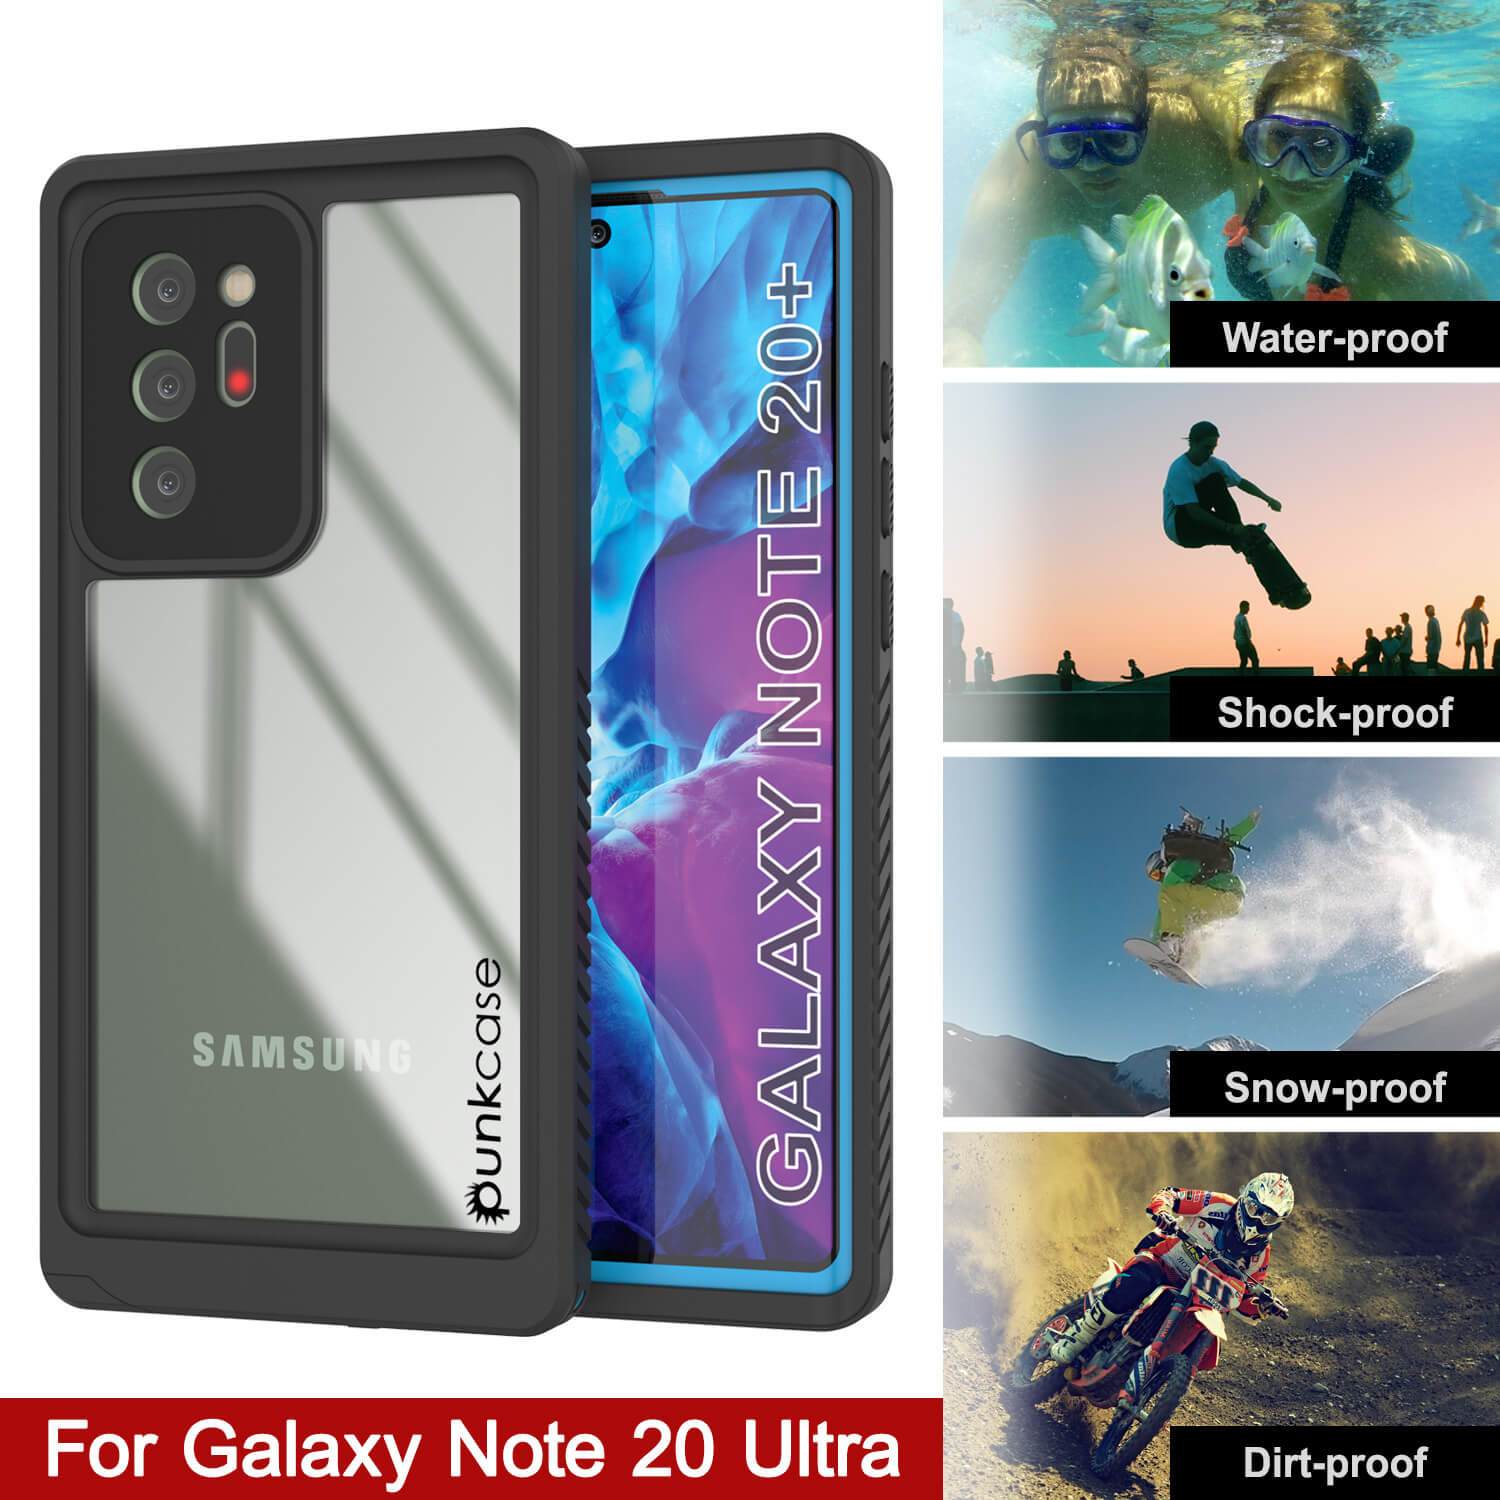 Galaxy Note 20 Ultra Case, Punkcase [Extreme Series] Armor Cover W/ Built In Screen Protector [Light Blue]